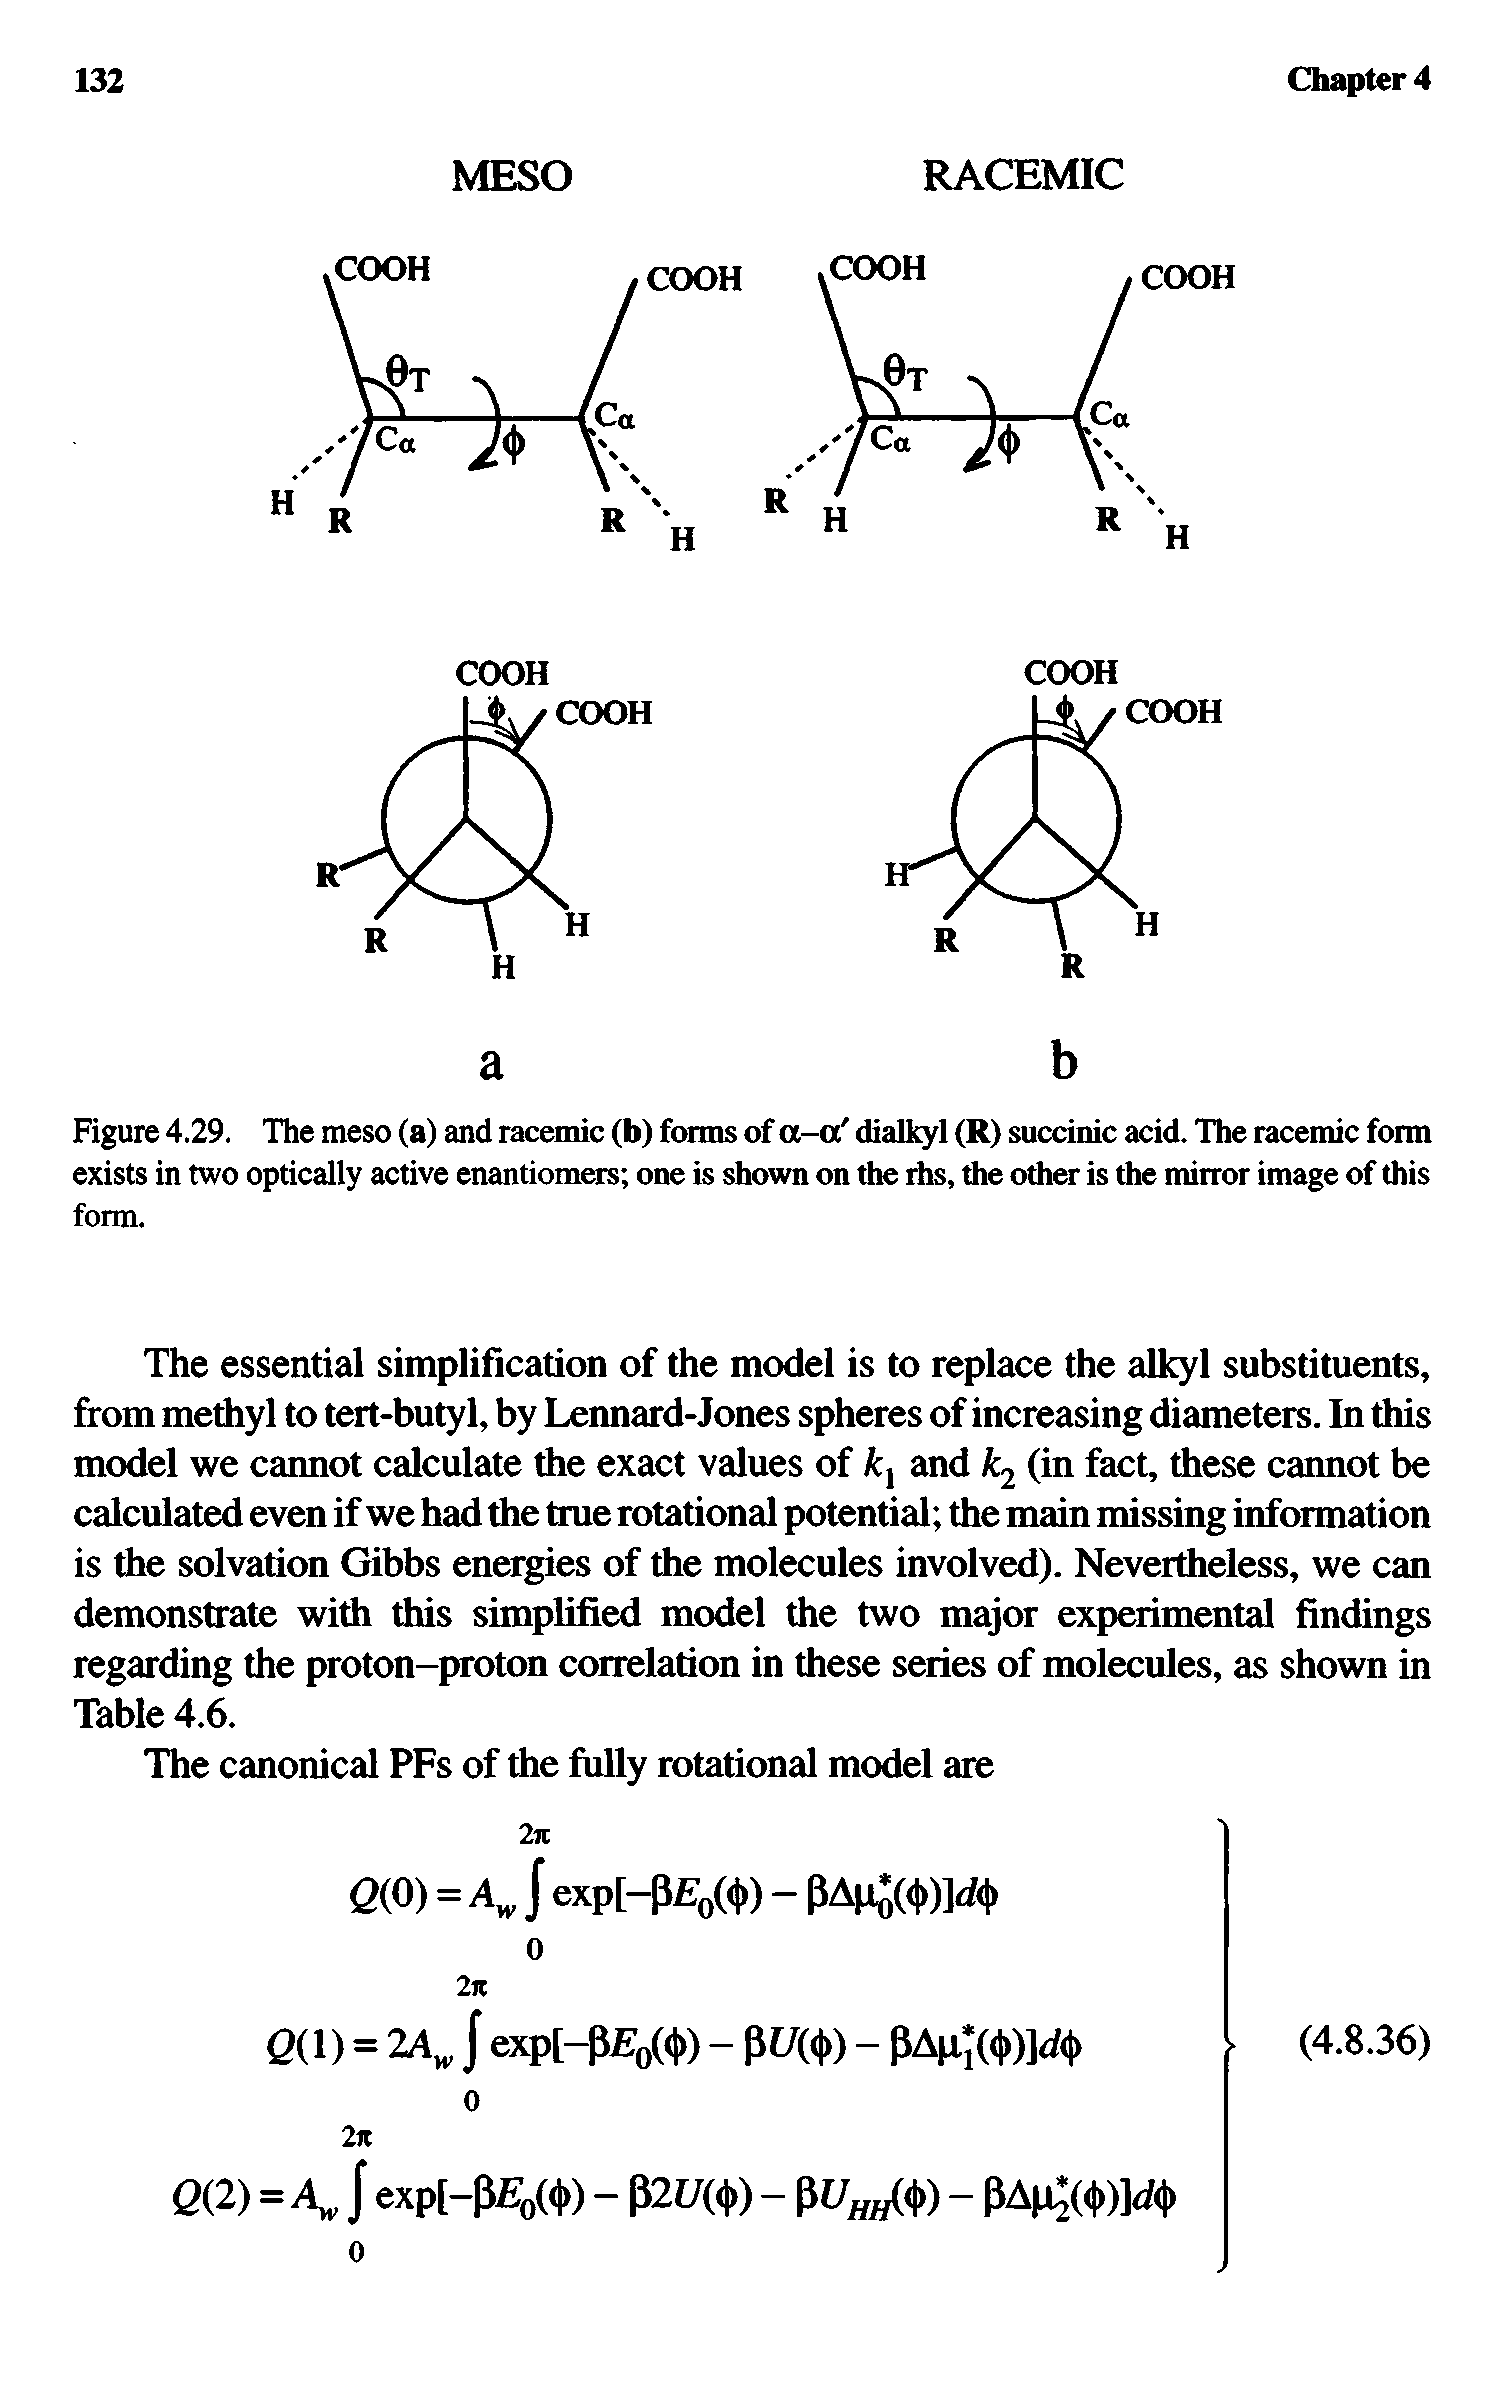 Figure 4.29. The meso (a) and racemic (b) forms of a-a dialkyl (R) succinic acid. The racemic form exists in two optically active enantiomers one is shown on the riis, the other is the mirror image of this form.